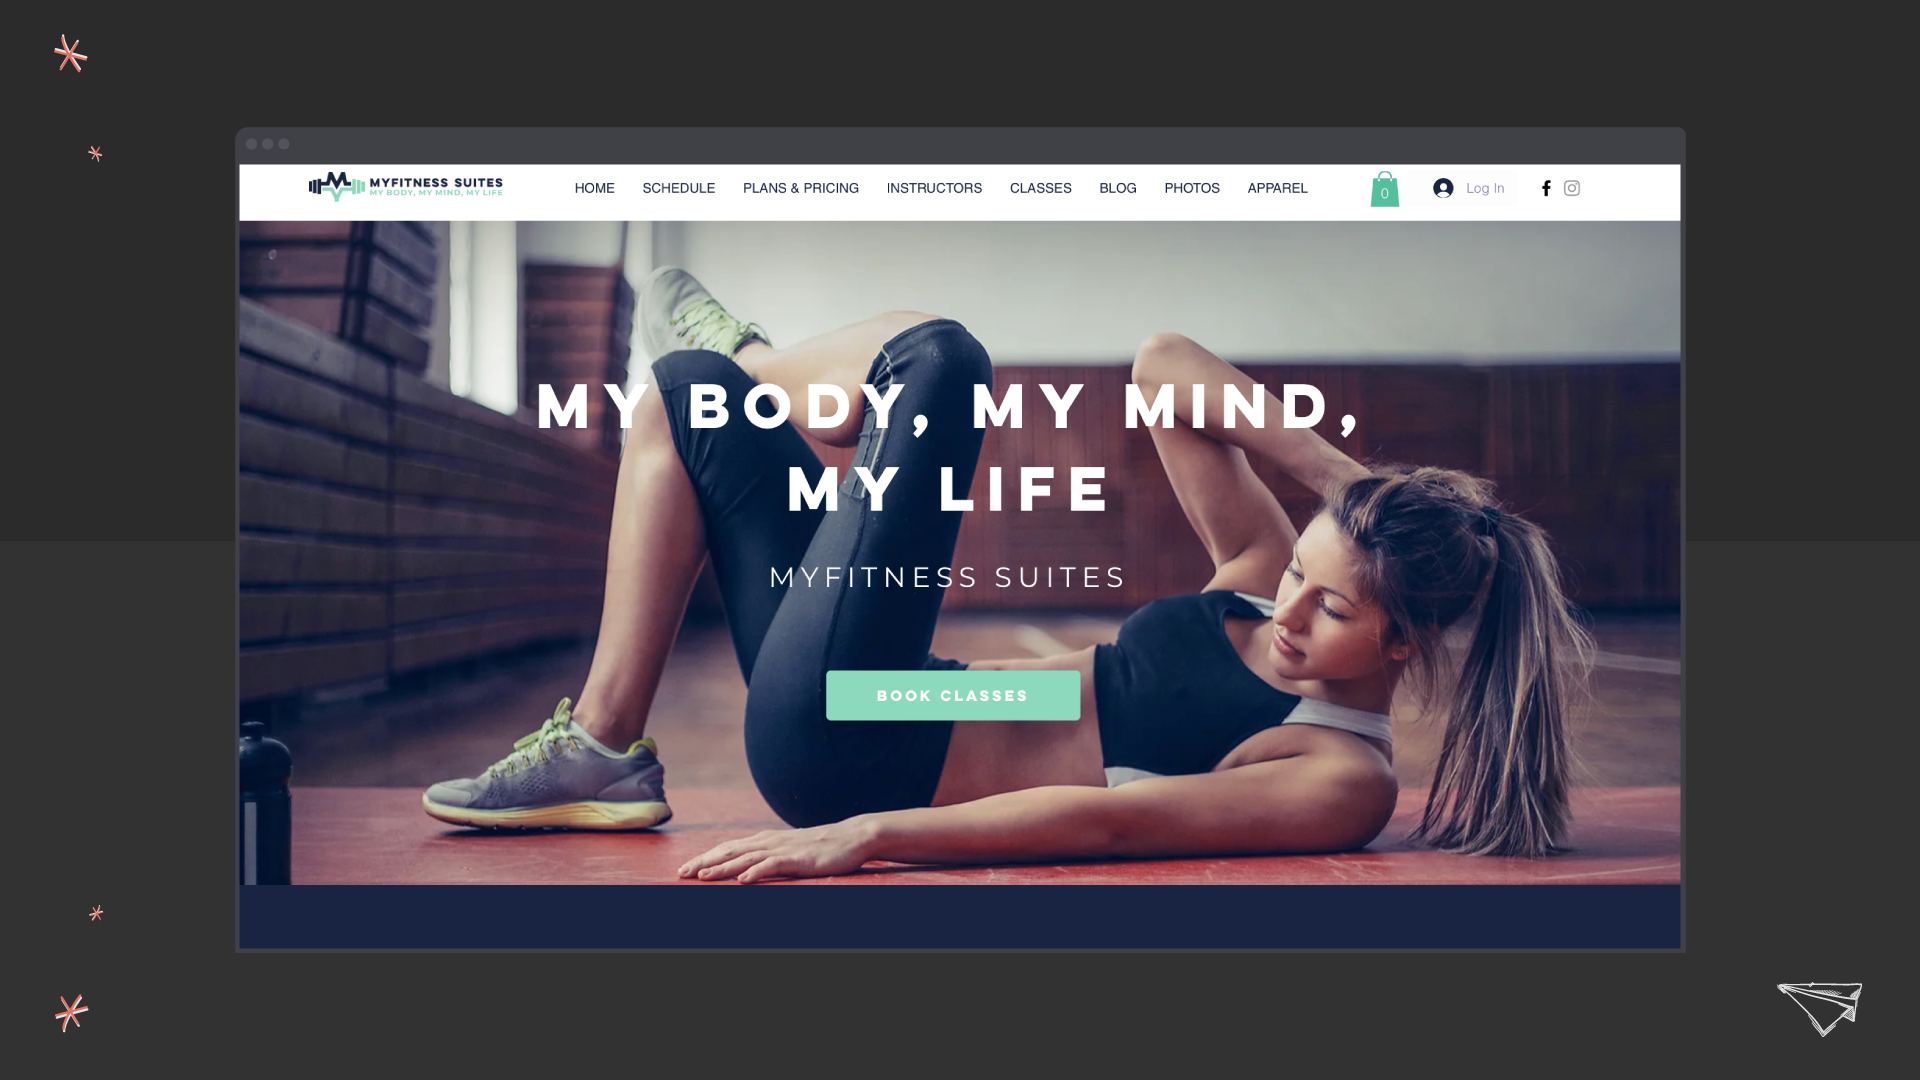 My Fitness Suites fitness web design